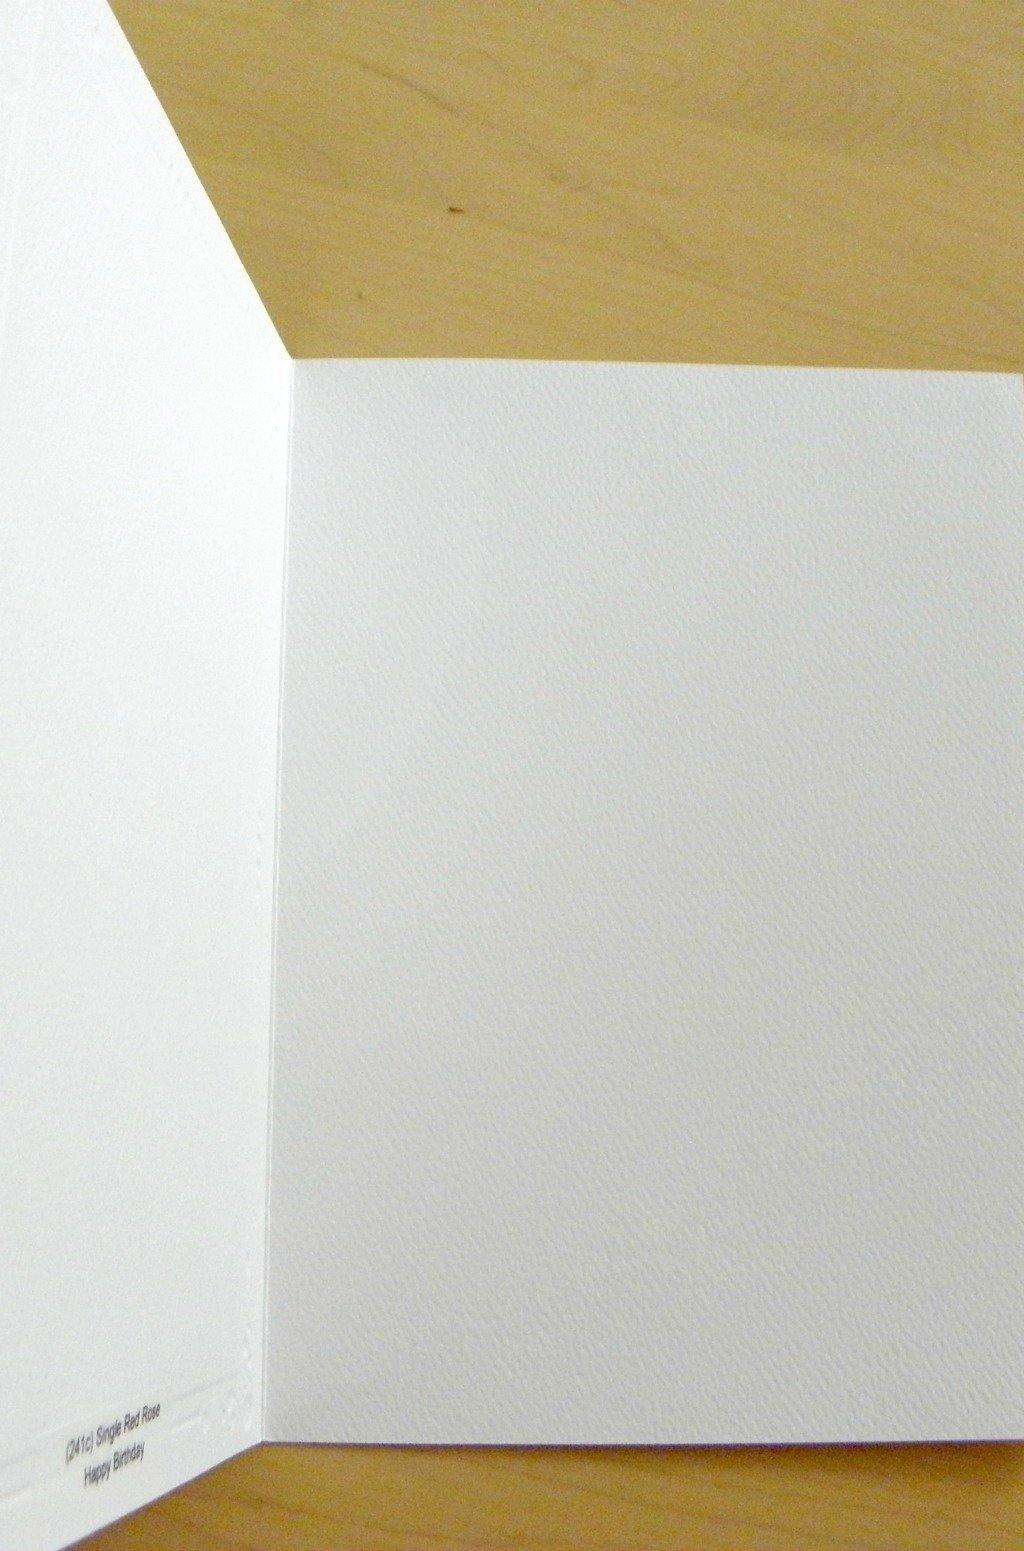 Blank inside view with plenty of room to write your own message